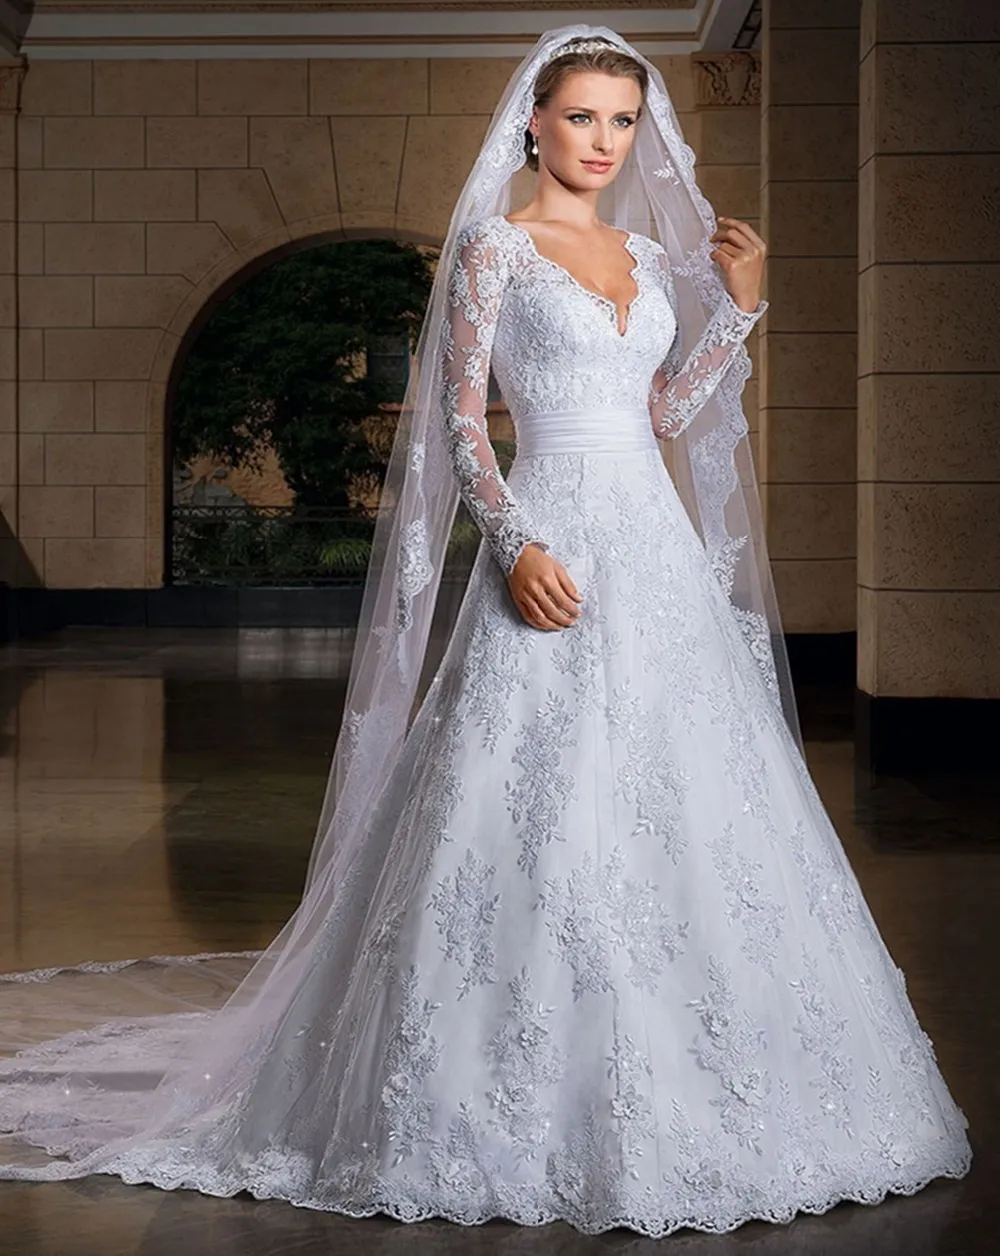 2020 Spring New Pure White Lace A-Line Wedding Dresses Plunging Neckline See Through Back Long Sleeves Bridal Gowns Vestido De Noiva Manga